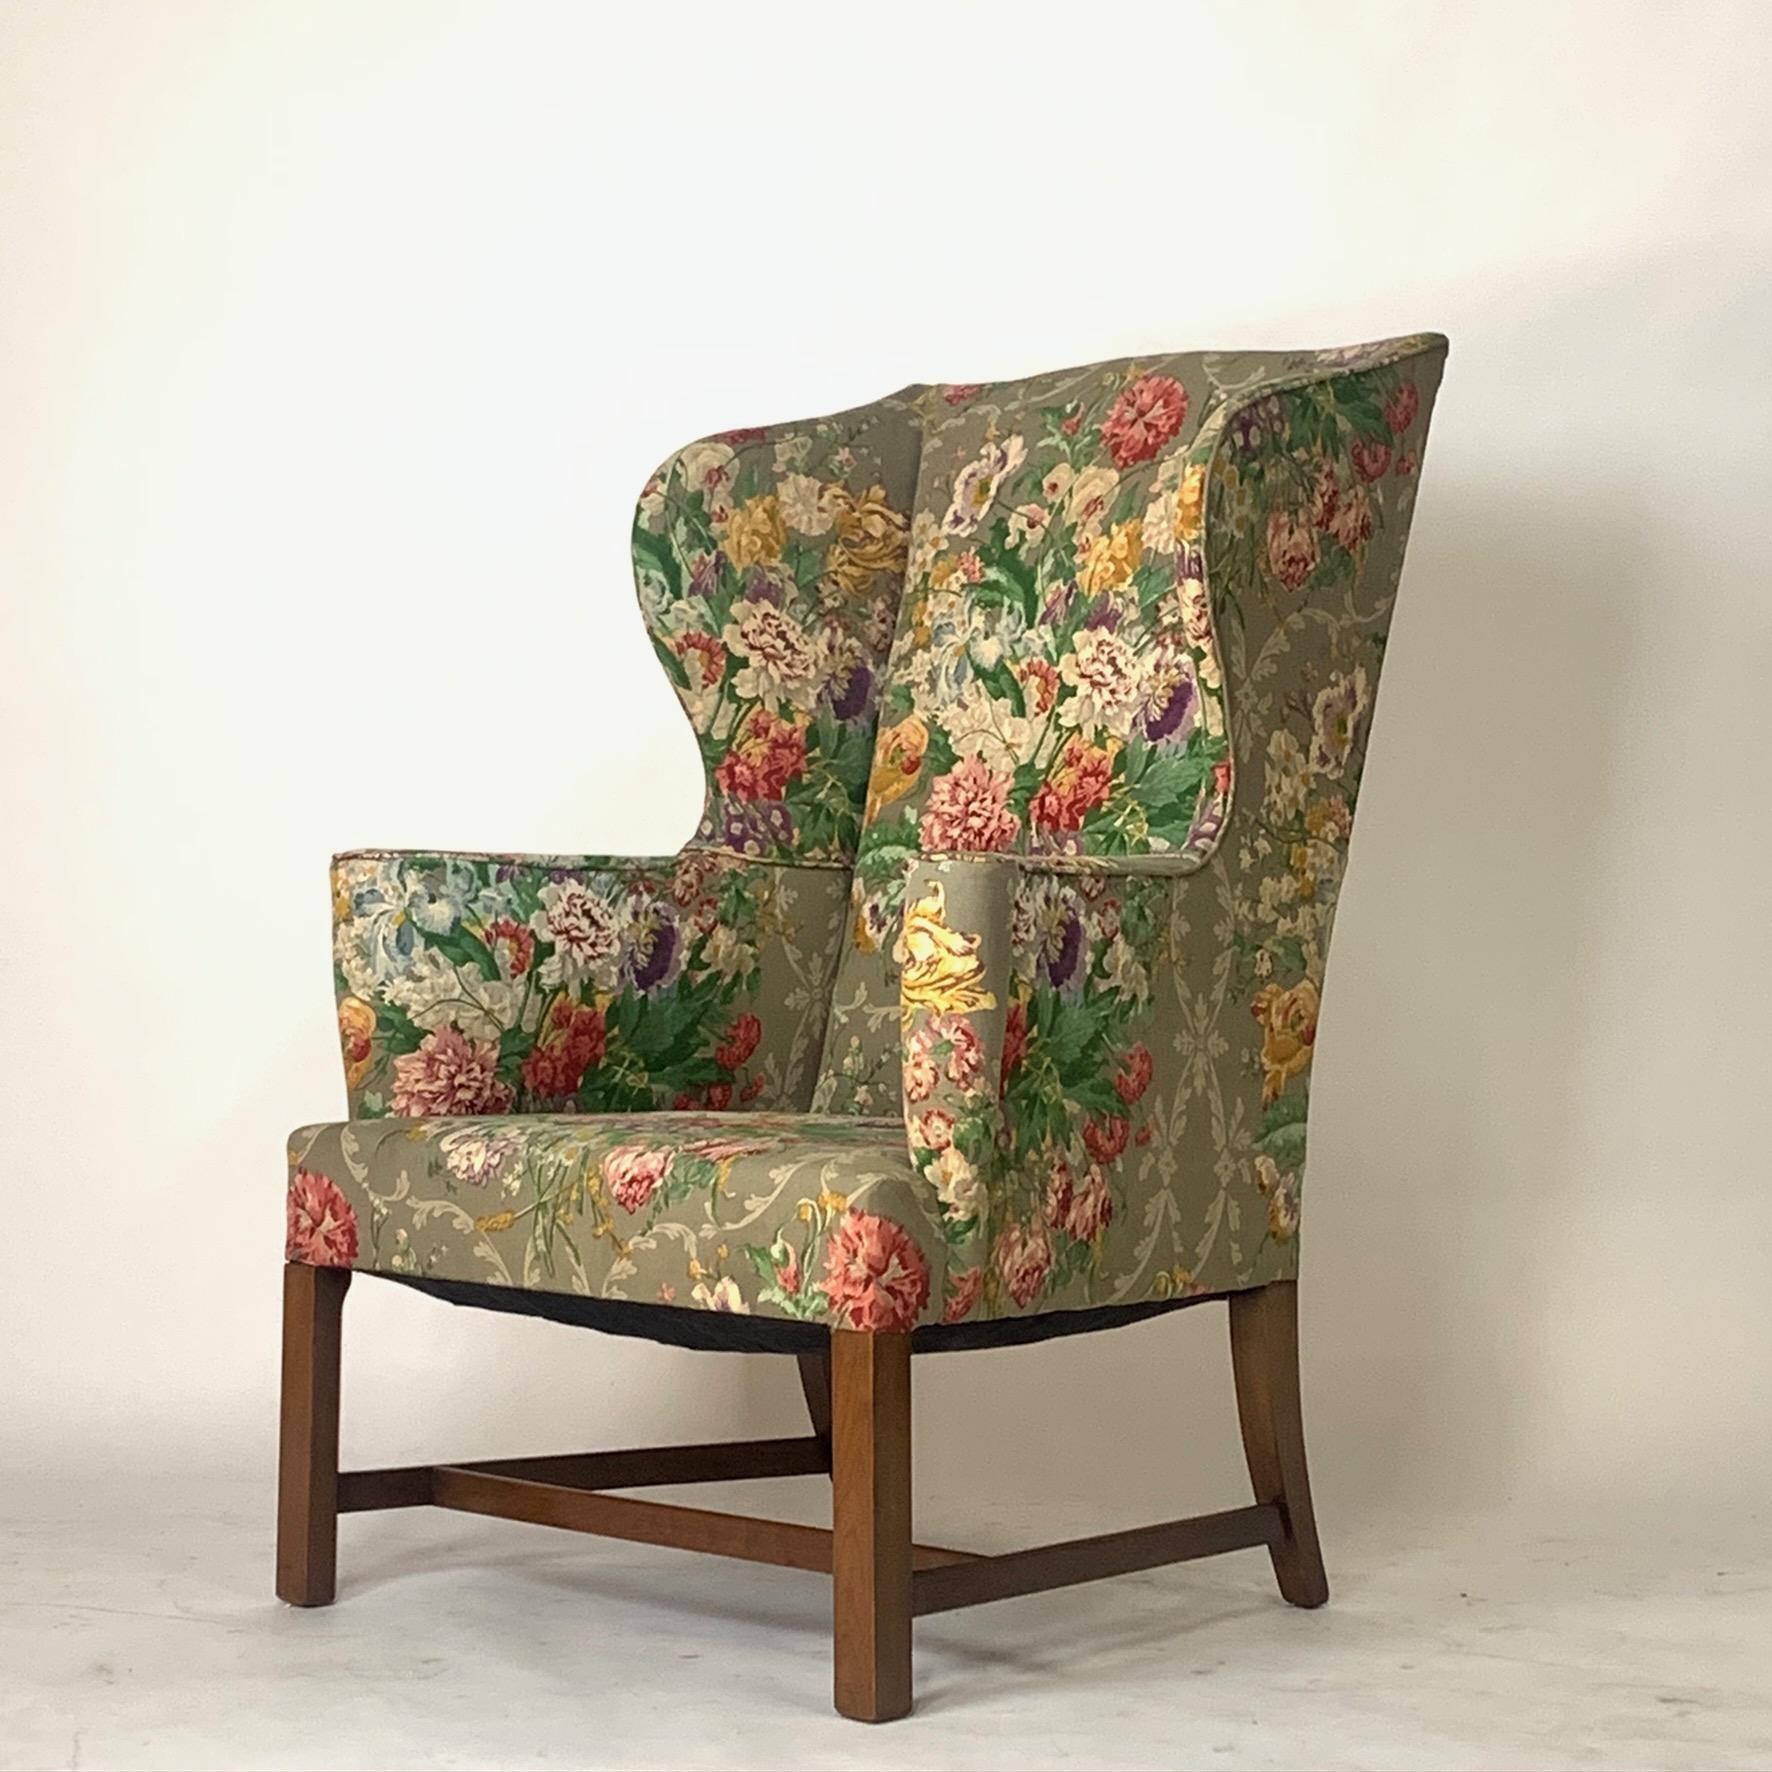 Exceptional Early American Wingback Chairs with Stunning Floral Upholstery 4